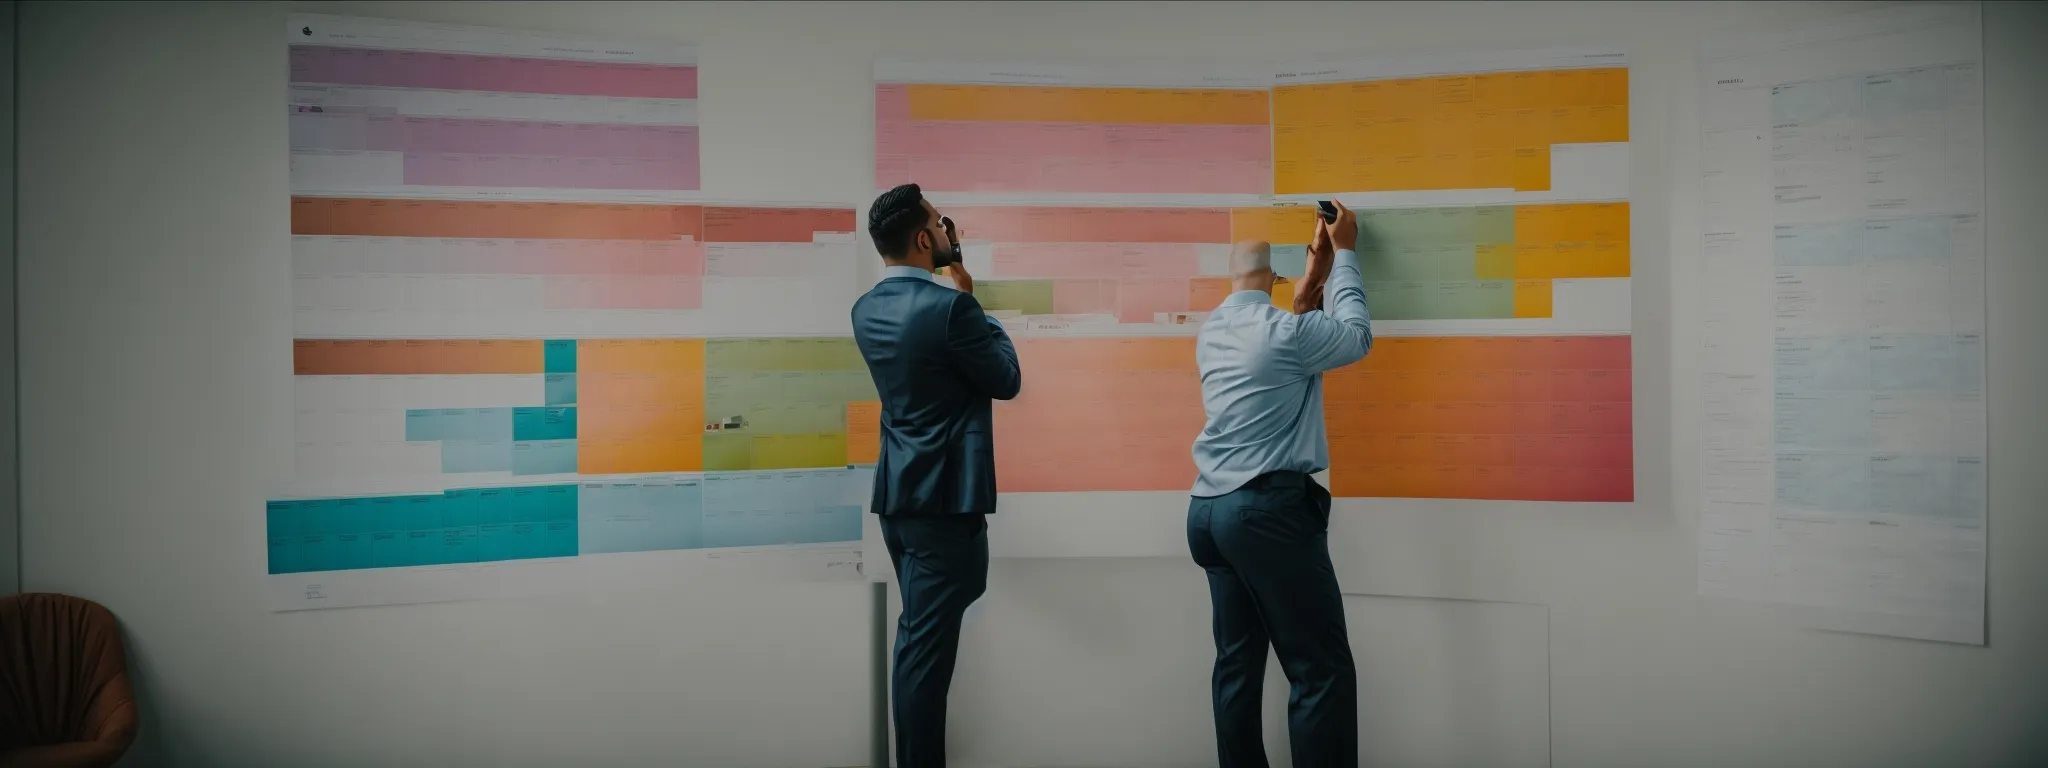 a marketer is strategizing in front of a large wall calendar filled with color-coded content plans and keywords.